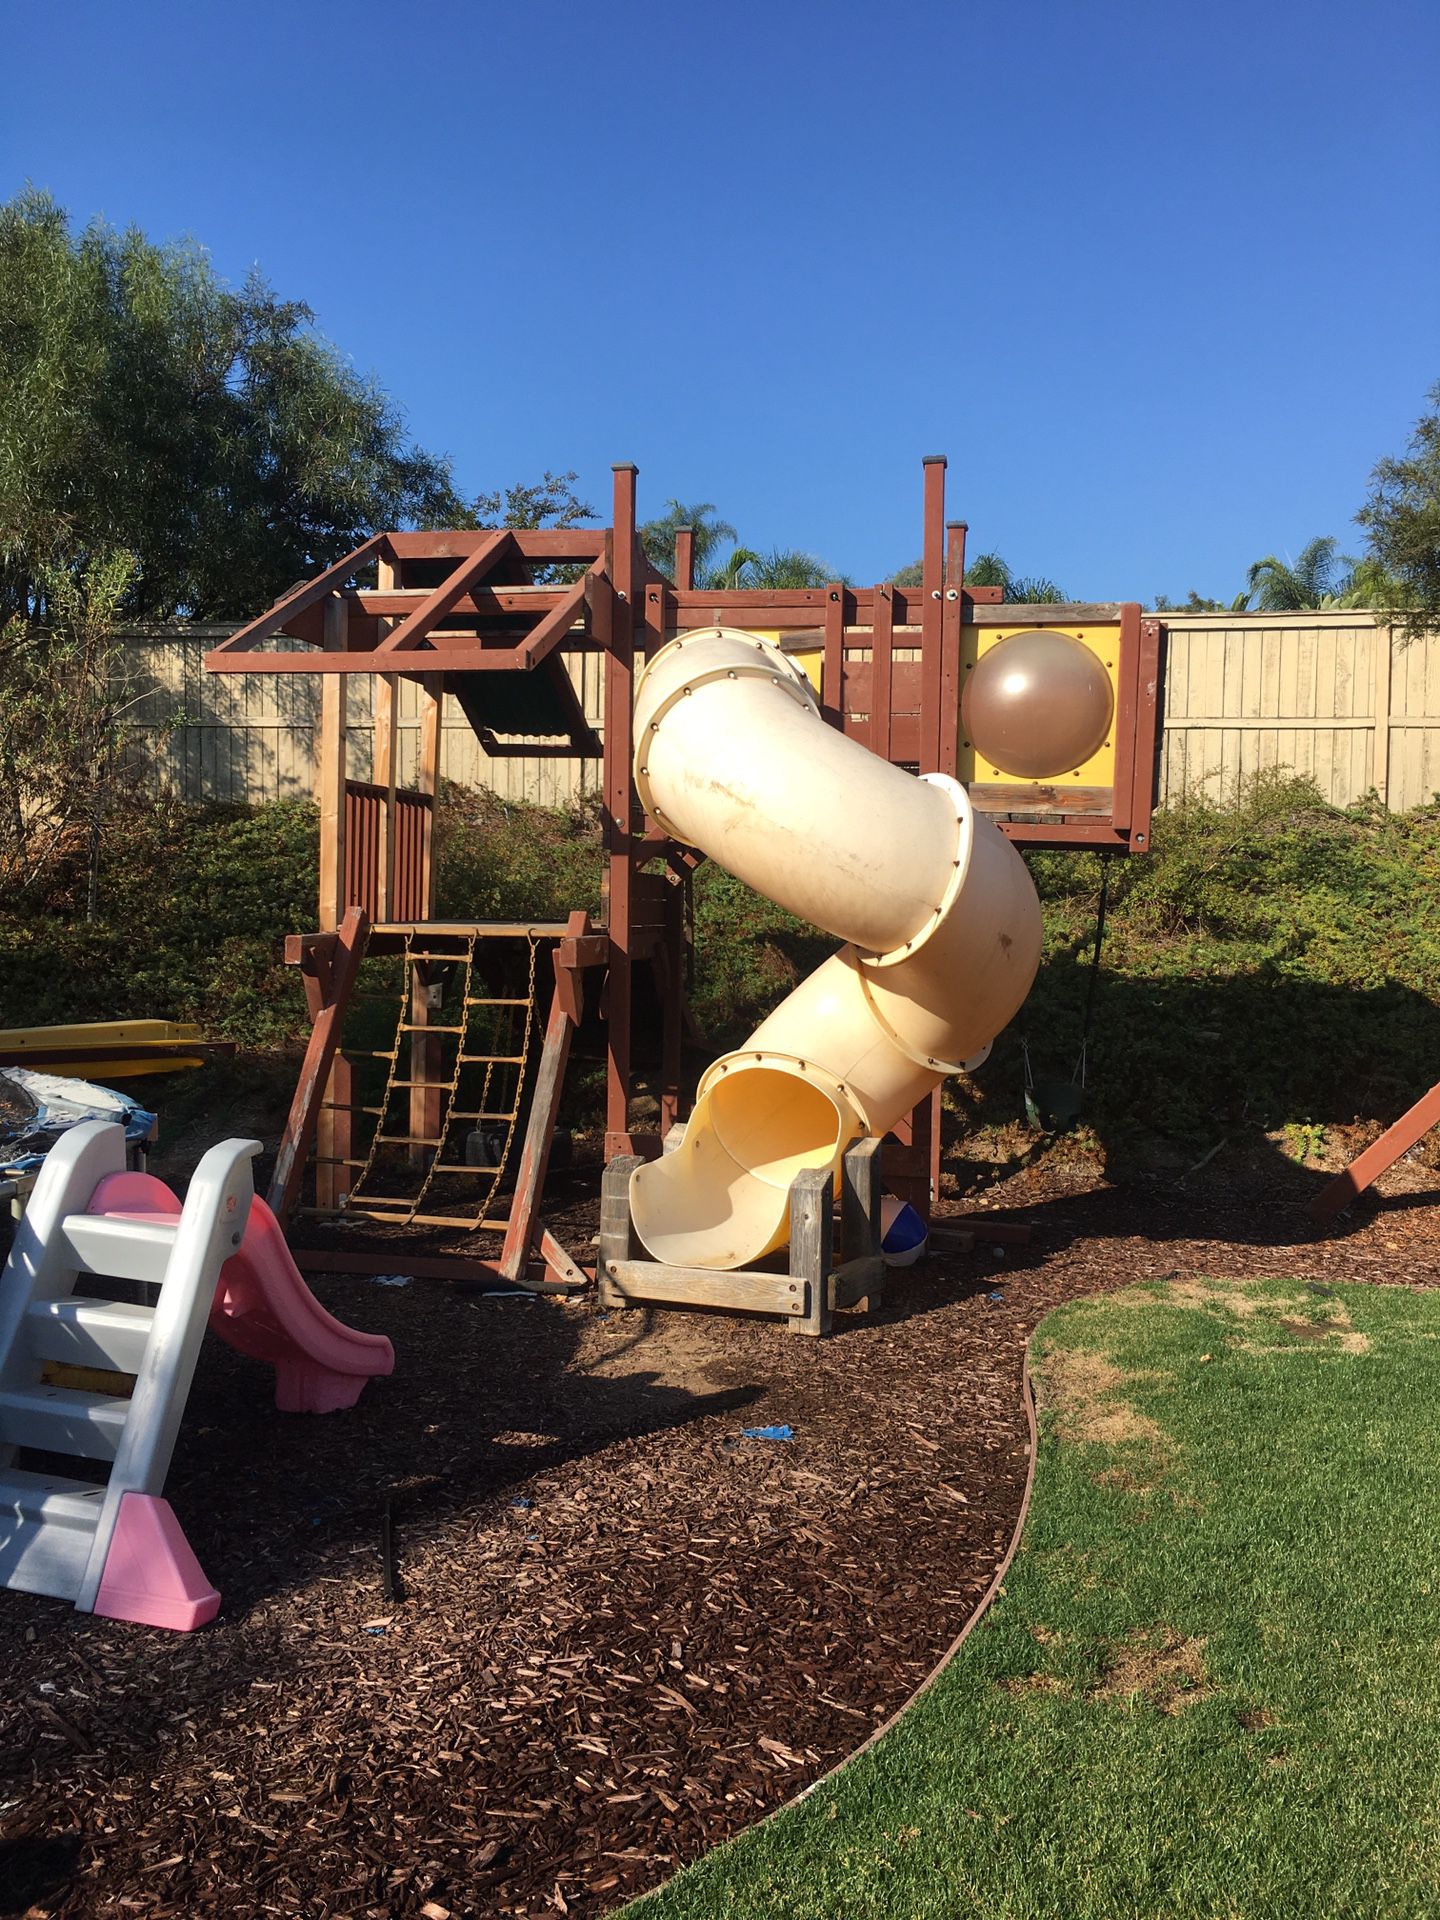 FREE custom play structure